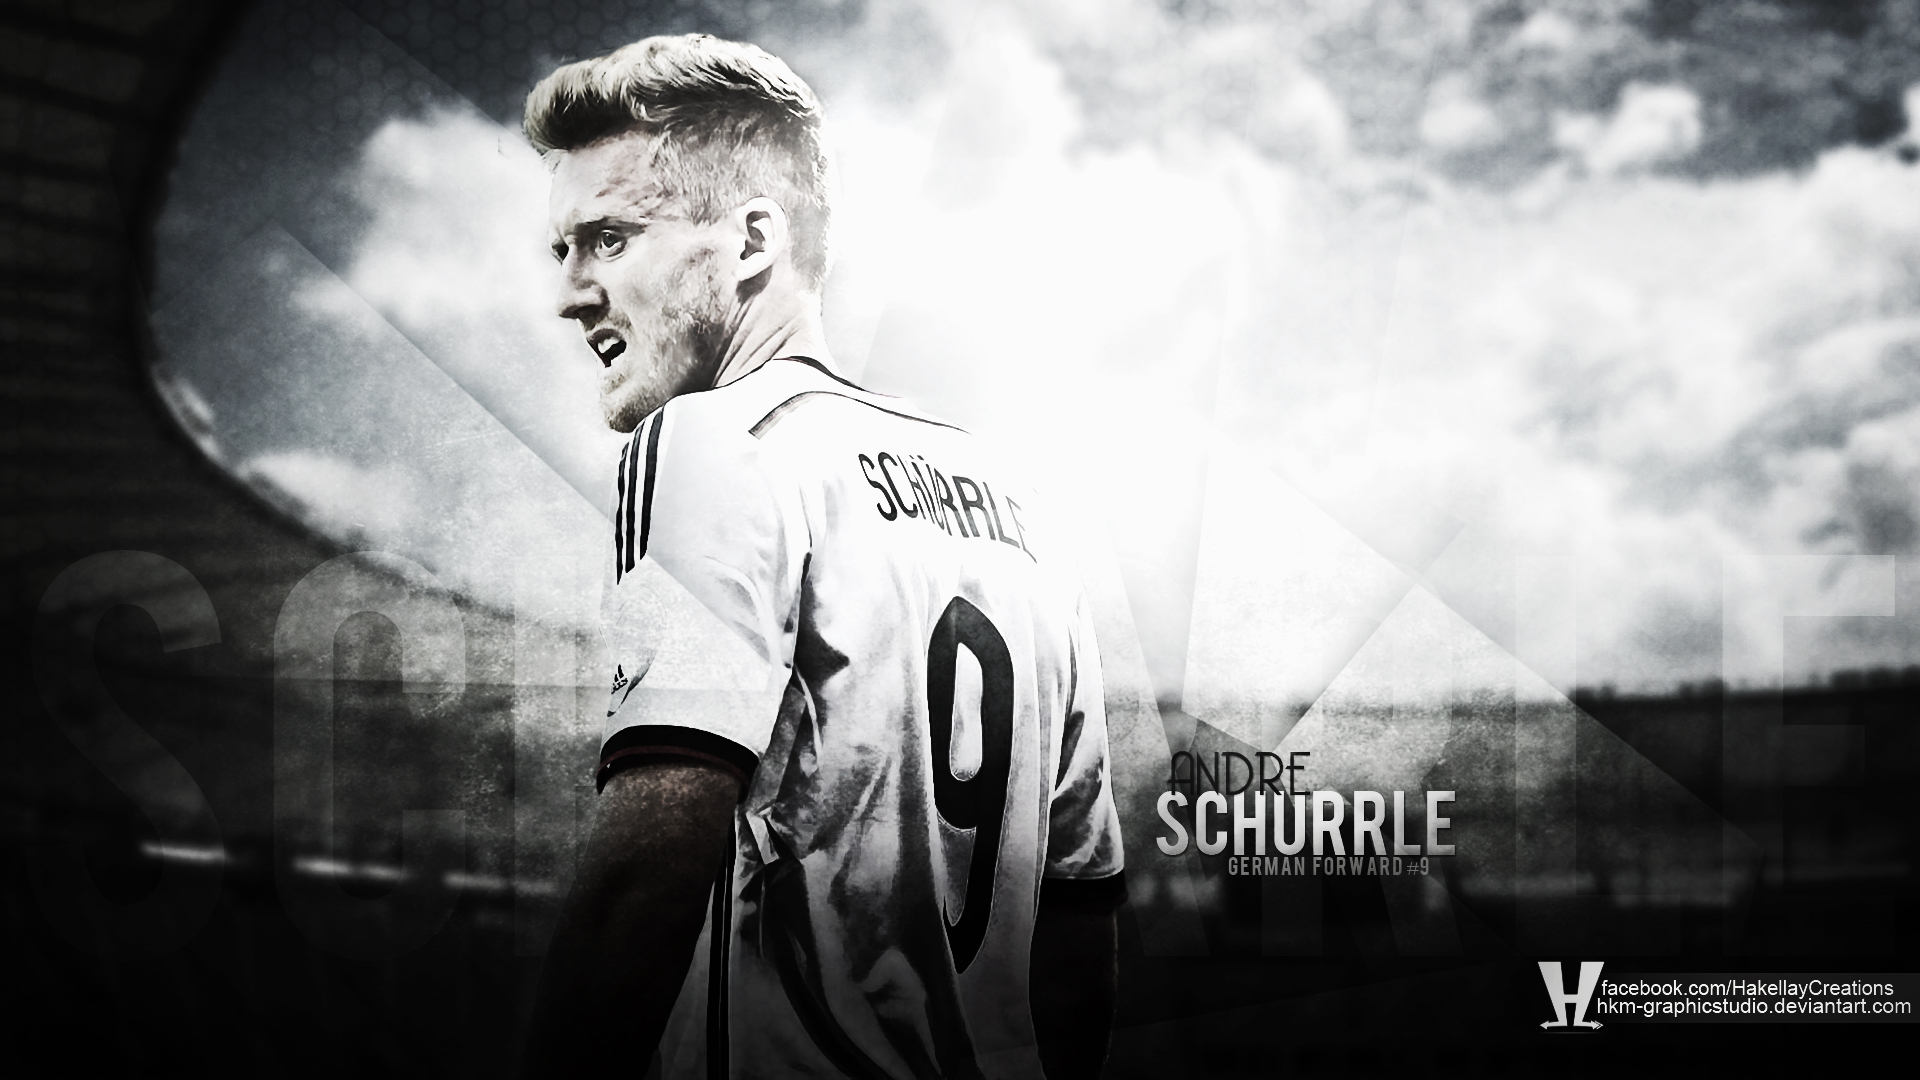 Andre Schurrle Wallpapers